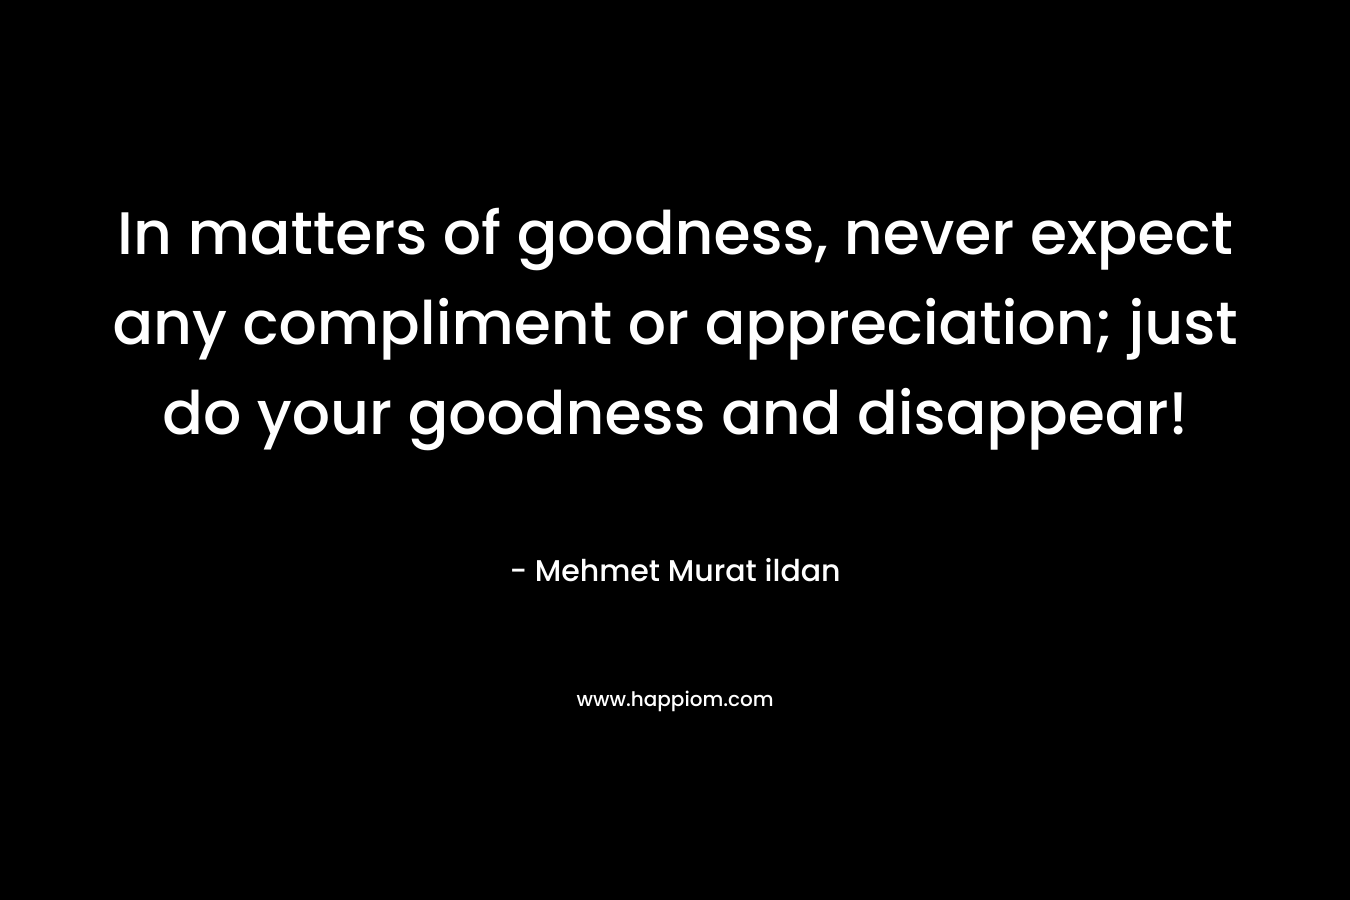 In matters of goodness, never expect any compliment or appreciation; just do your goodness and disappear! – Mehmet Murat ildan